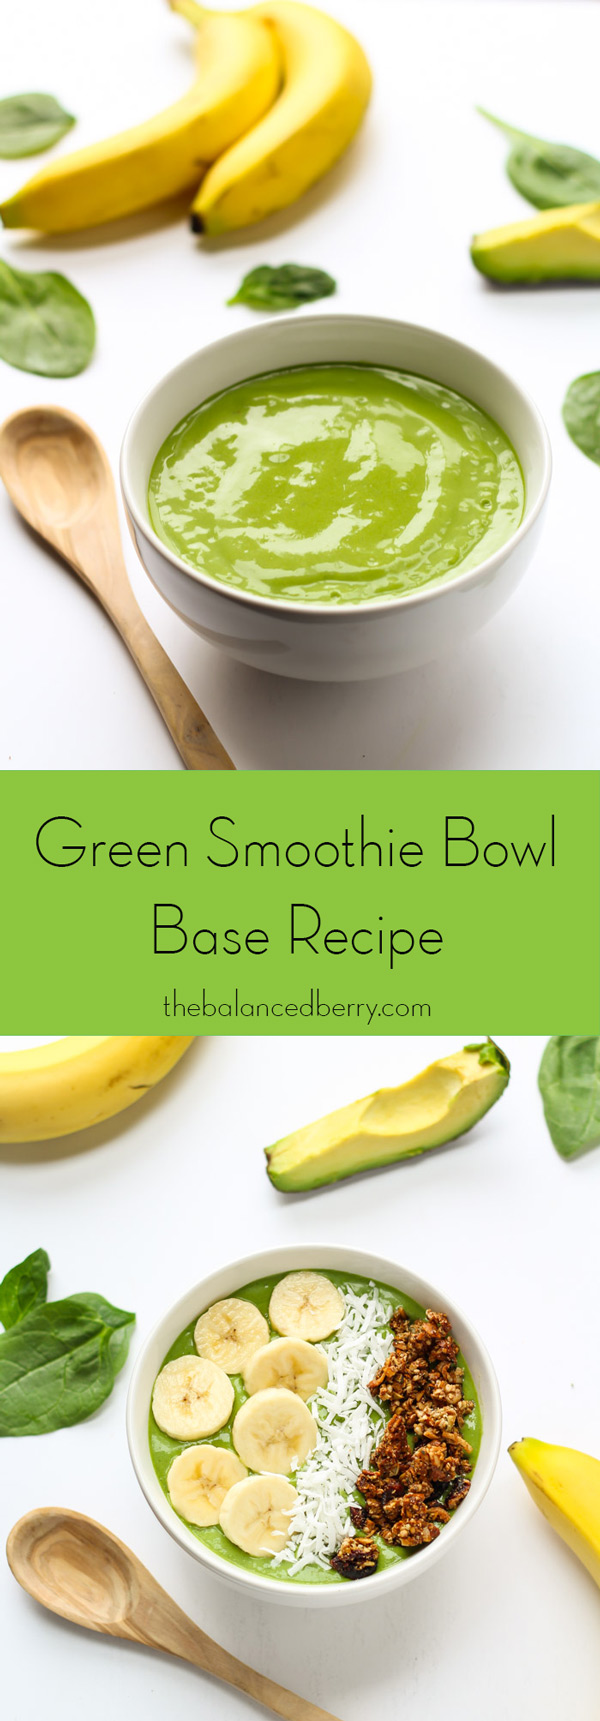 The Best Green Smoothie Bowl - creamy, delicious and ready for all of your favorite toppings! via thebalancedberry.com